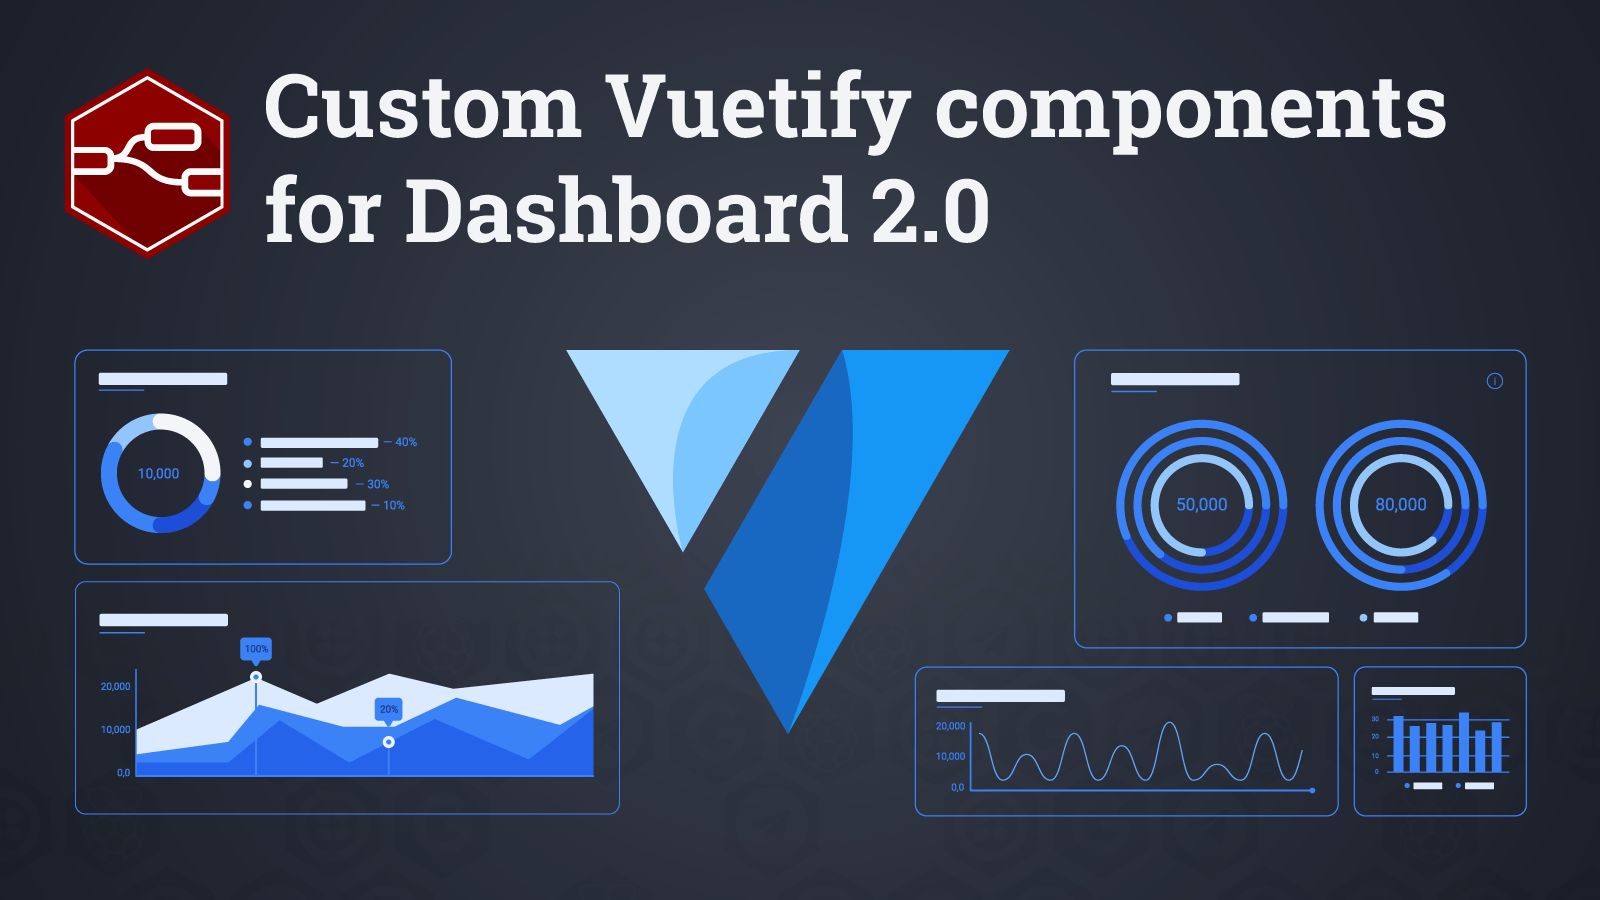 Image representing Custom Vuetify components for Dashboard 2.0